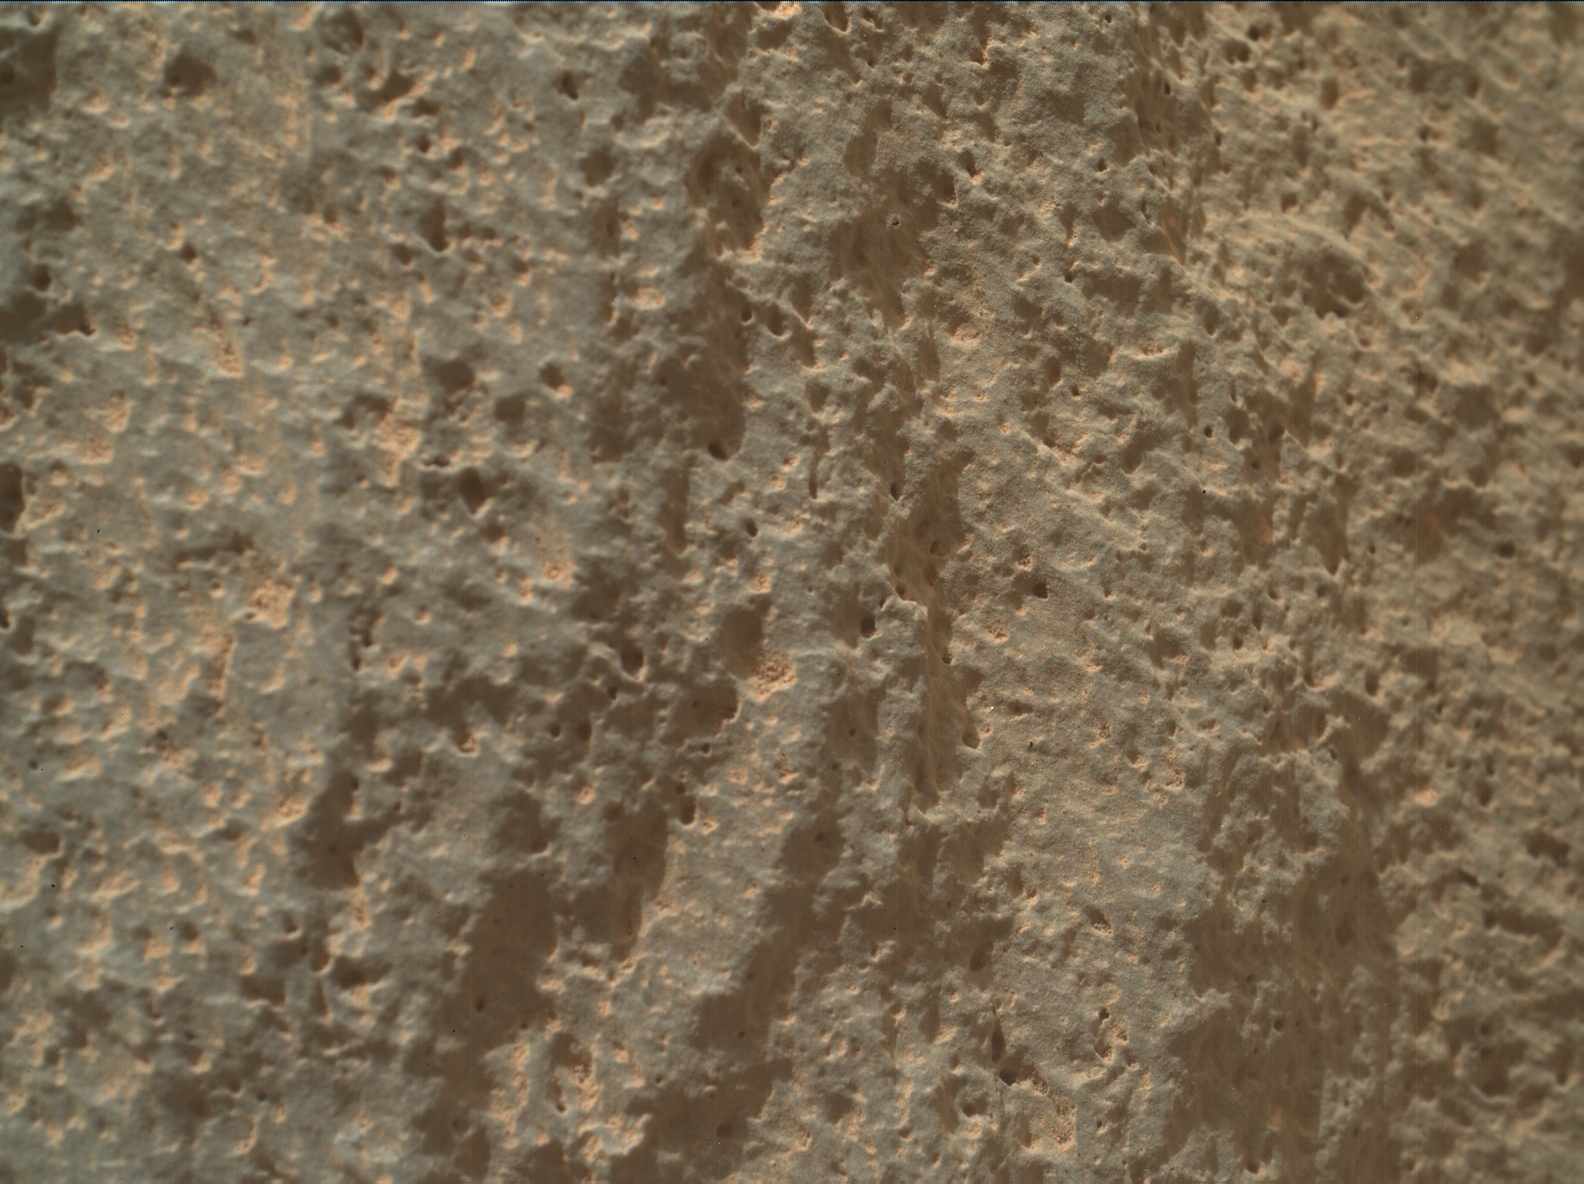 Nasa's Mars rover Curiosity acquired this image using its Mars Hand Lens Imager (MAHLI) on Sol 3432